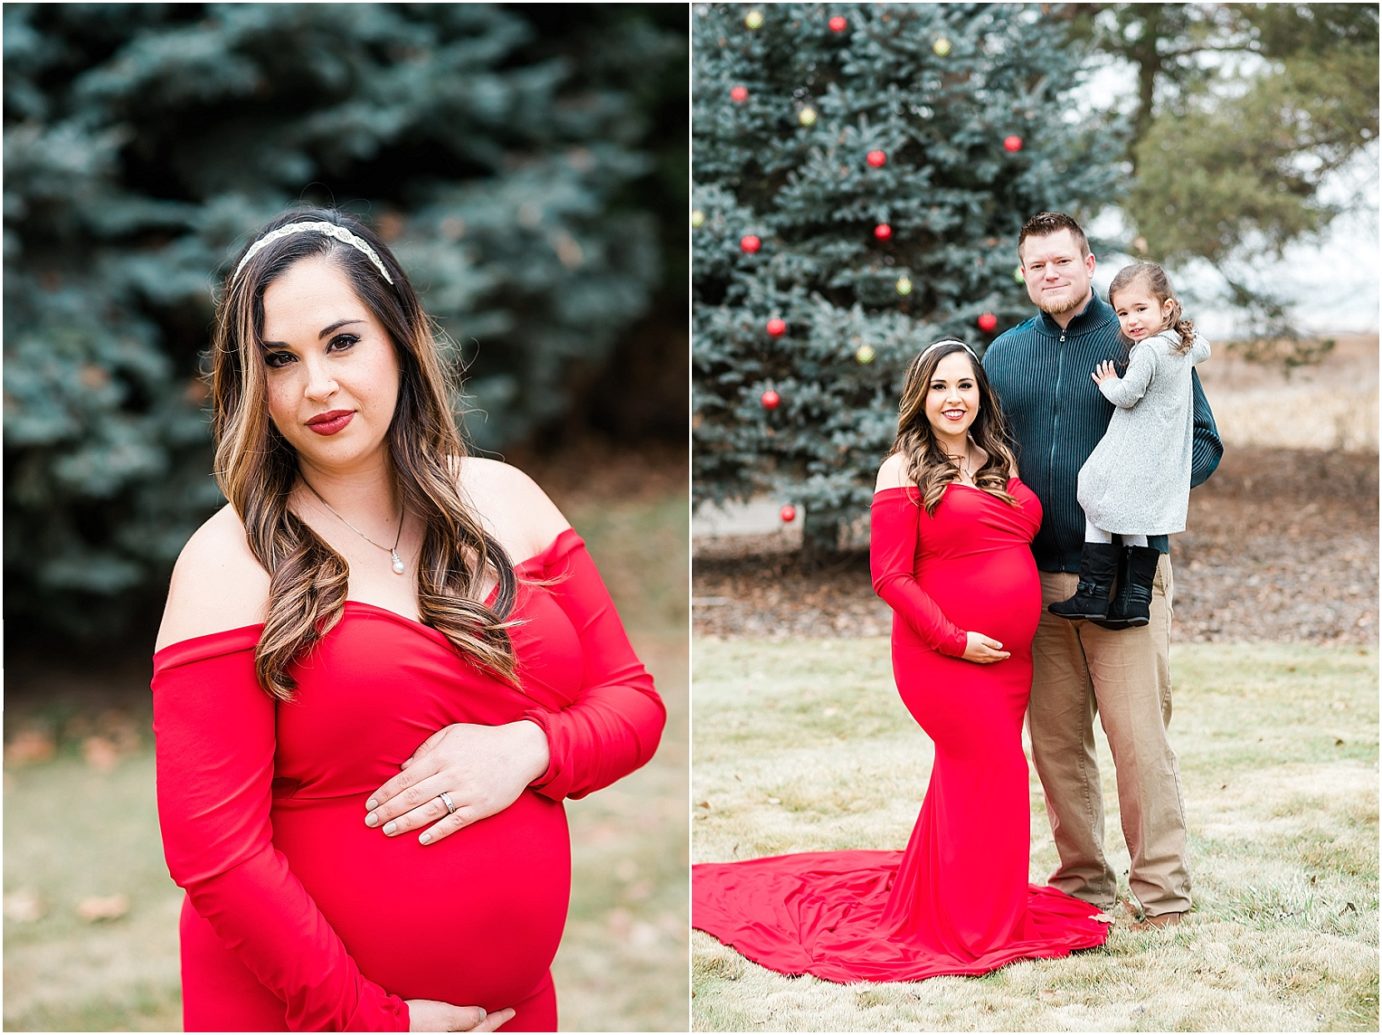 Maries maternity session prenant woman in long red dress with first child